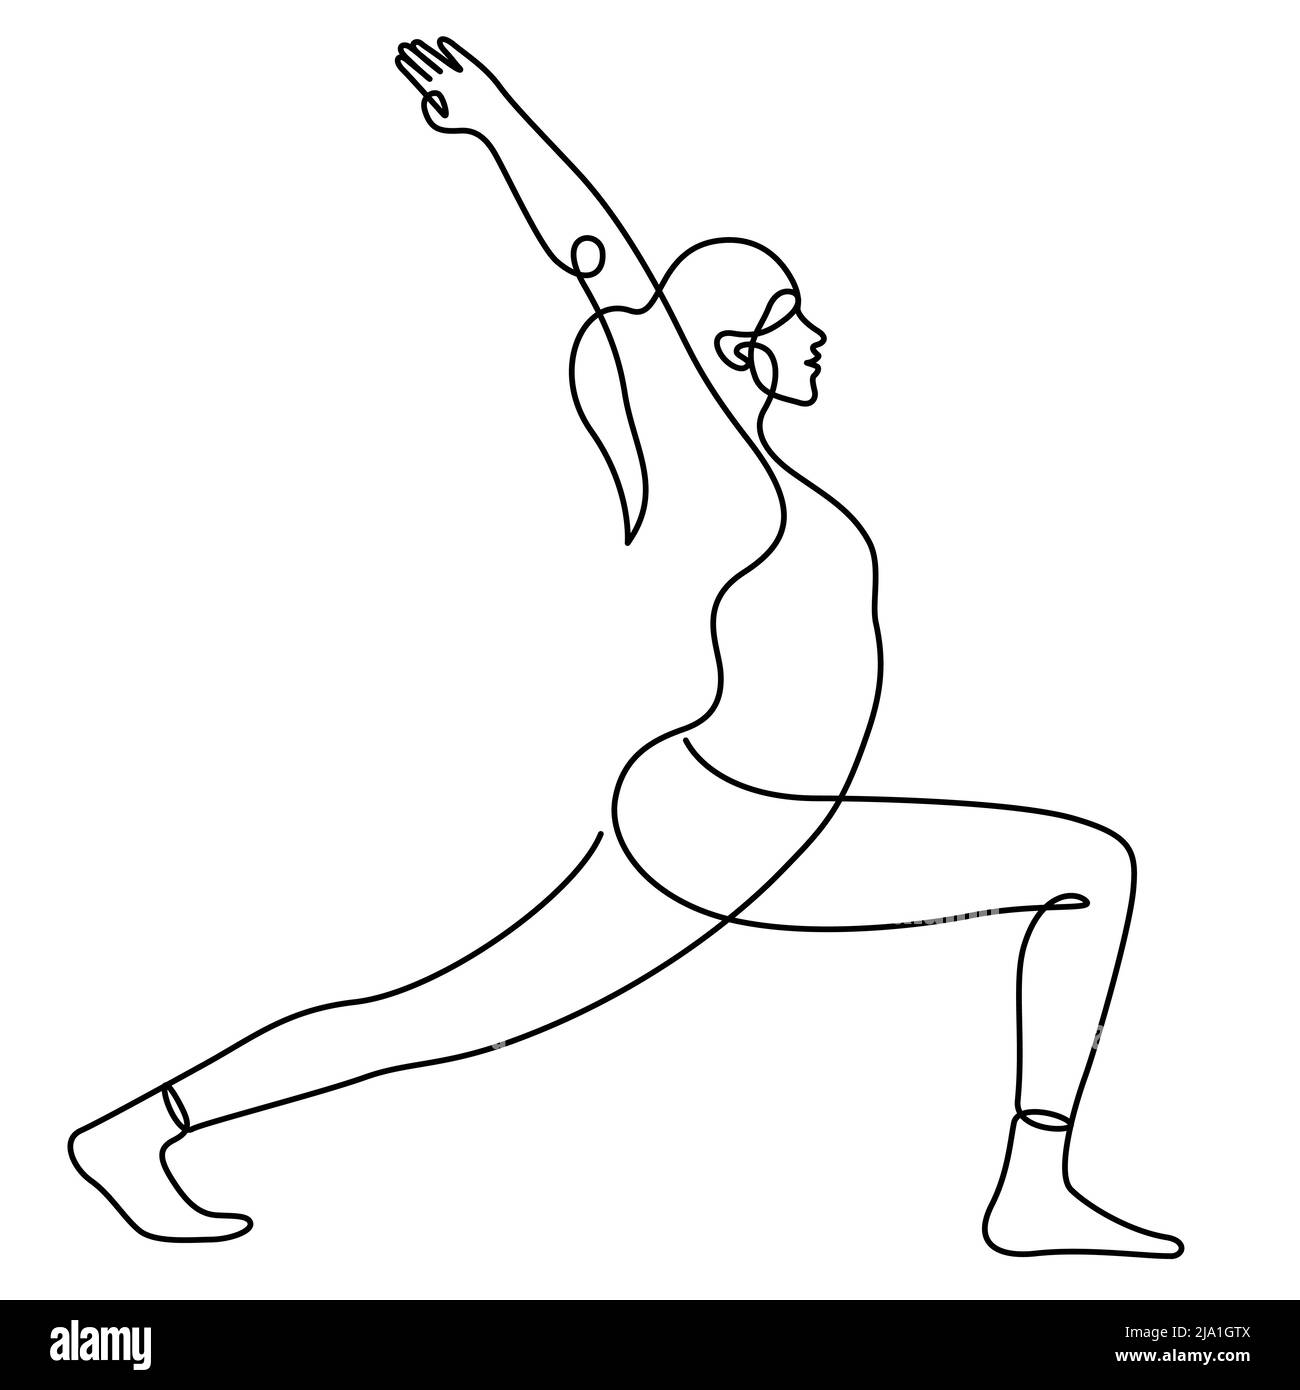 woman in warrior pose yoga balancing vector illustration. One line drawing and continuous style isolated on white background. Stock Vector